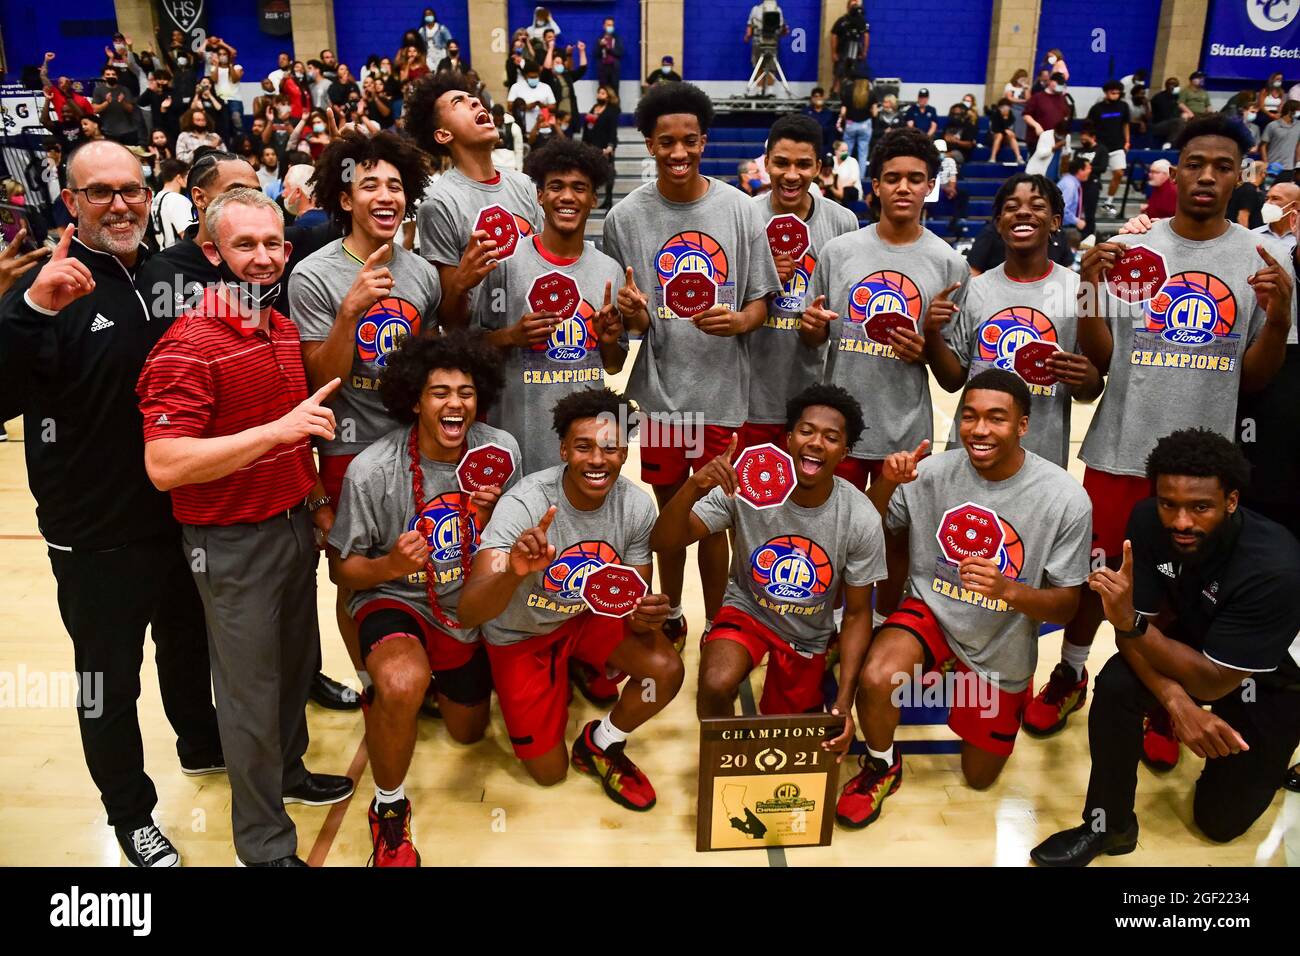 Centennial Huskies pose after winning the 2021 CIF Southern Section Championship basketball game on Friday, June 11, 2021, in Chatsworth. Centennial d Stock Photo